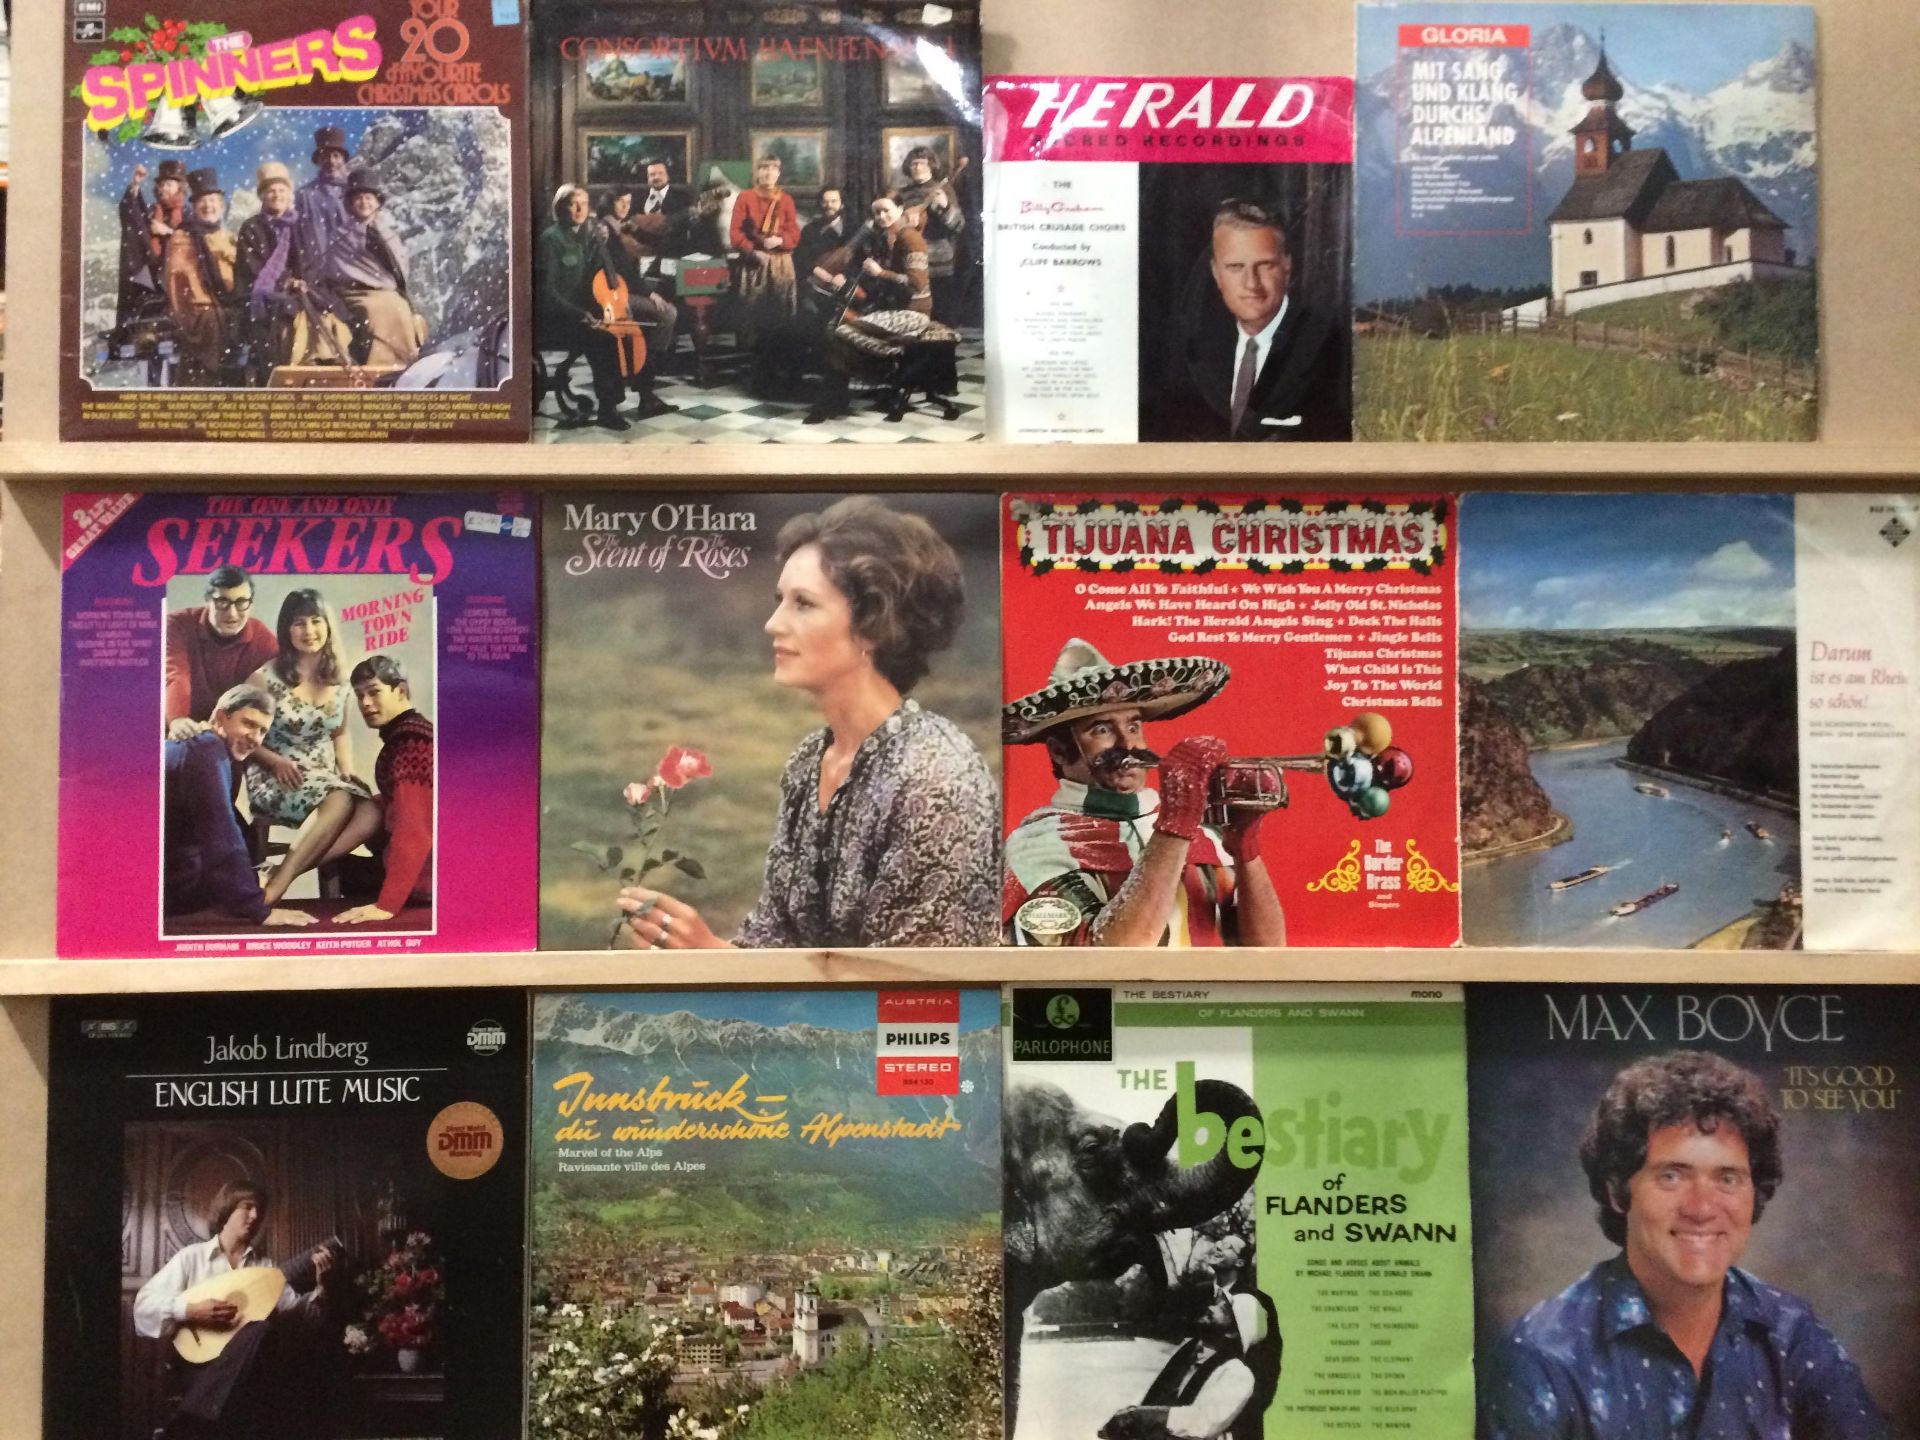 Contents to green plastic box - approximately 70 assorted LPs - many Spinners and other folk music,